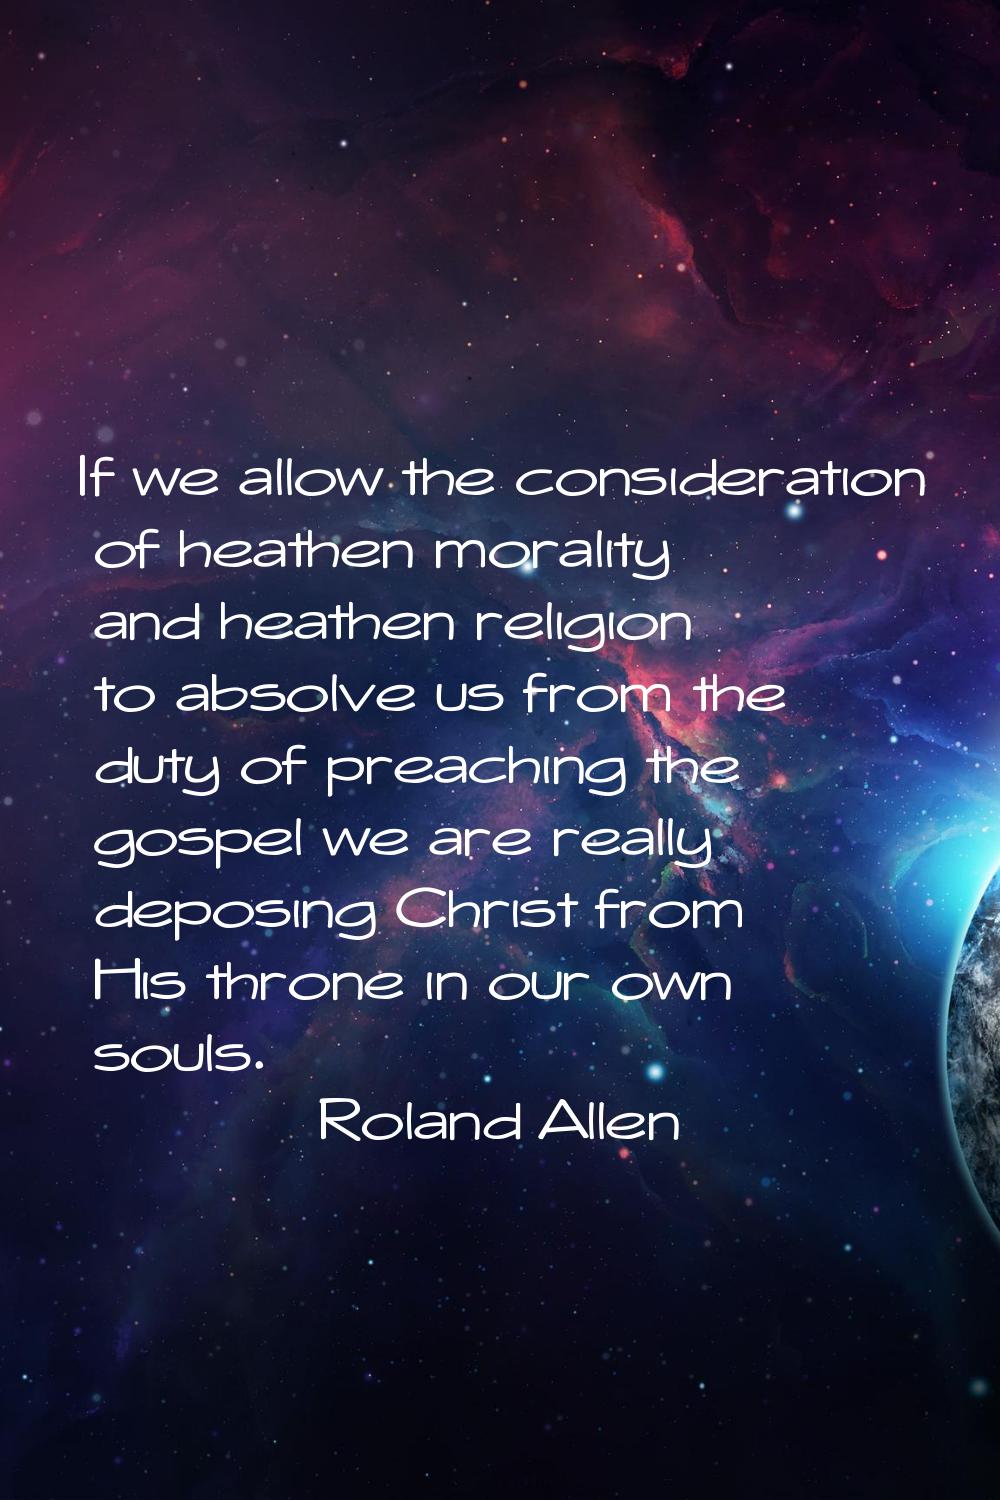 If we allow the consideration of heathen morality and heathen religion to absolve us from the duty 